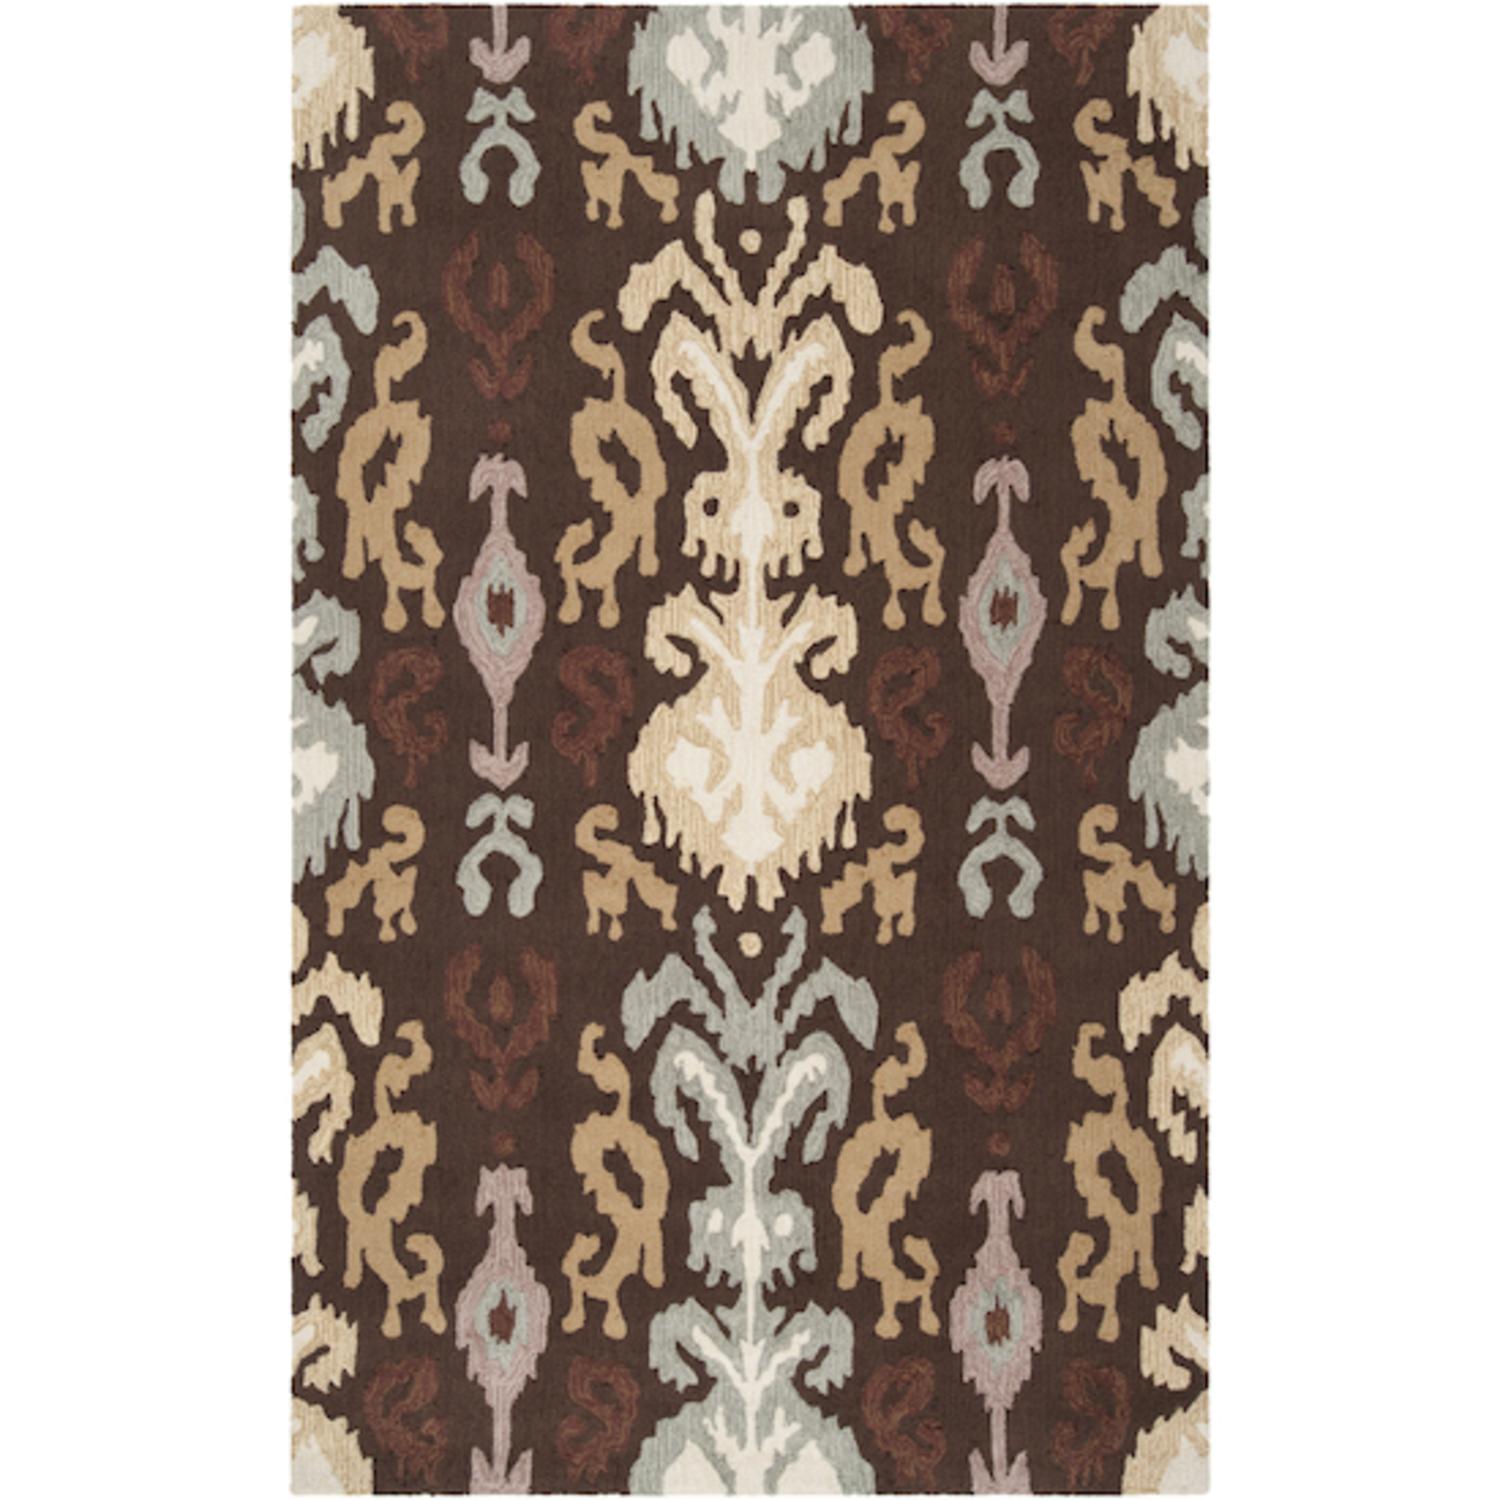 Diva At Home 8' x 10' Calcutta Dark Cocoa, Off-White and Taupe Hand Hooked Area Throw Rug